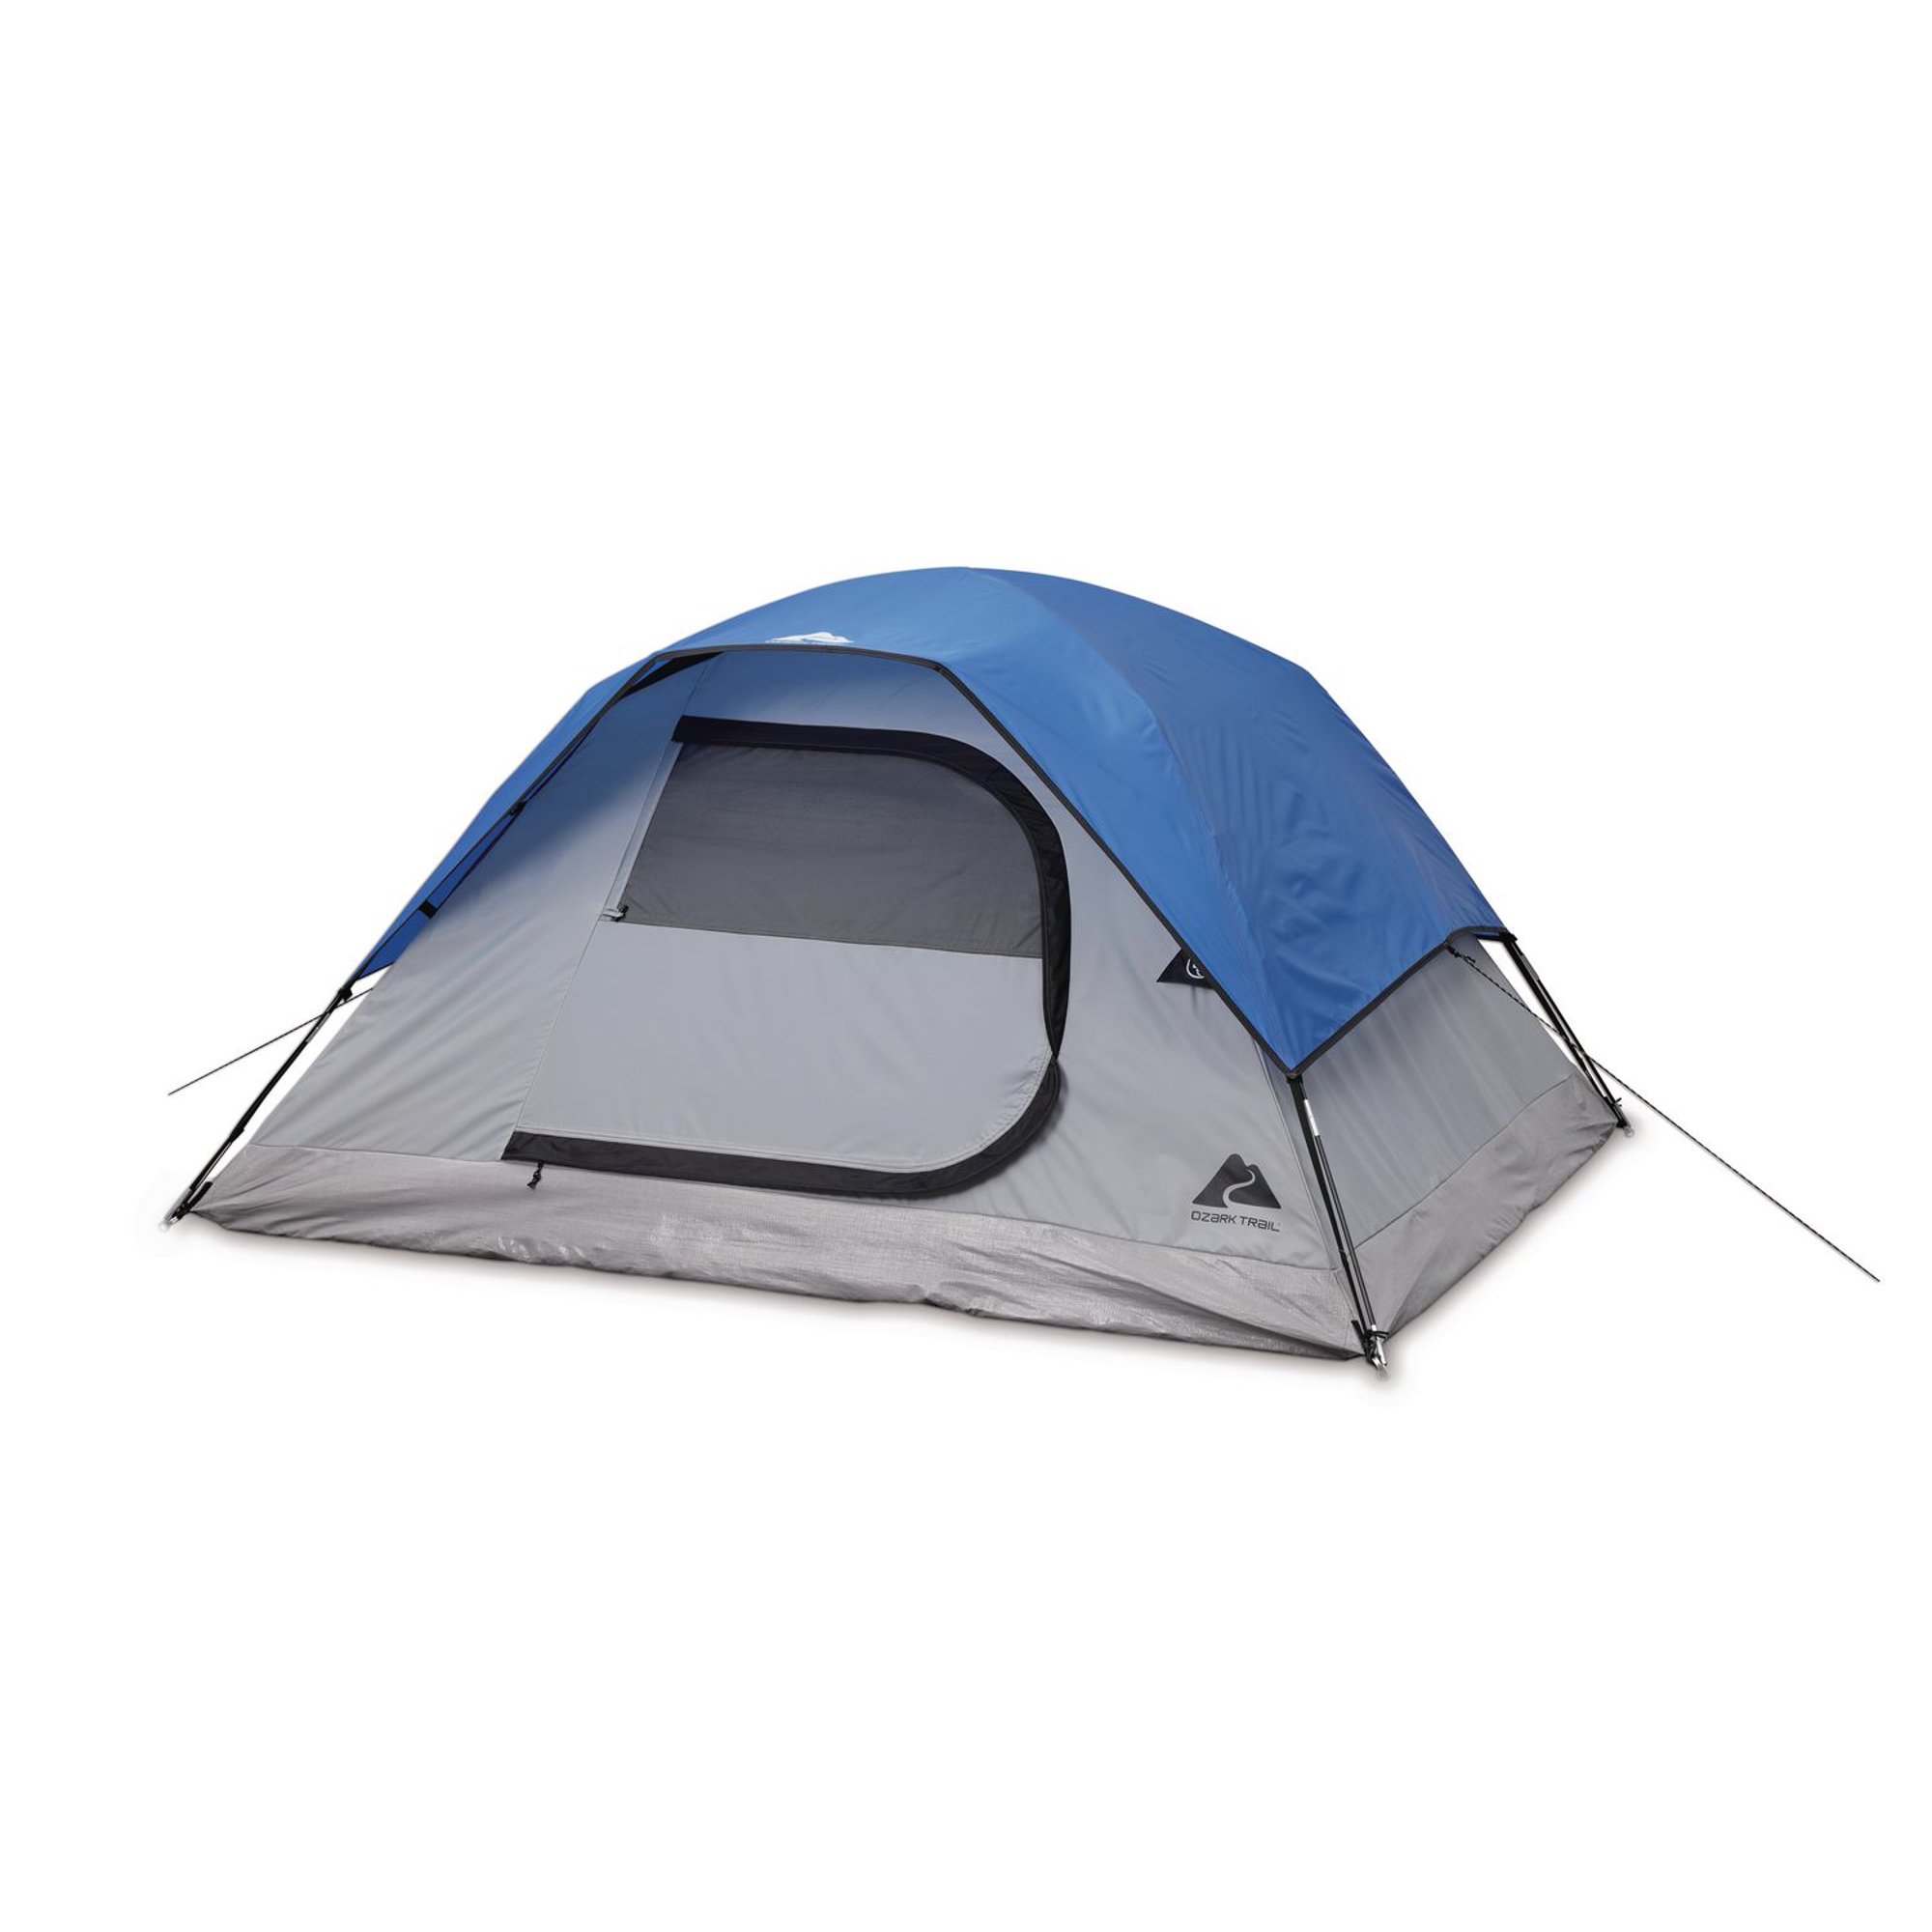 Ozark Trail 3-Person Camping Dome Tent | vlr.eng.br